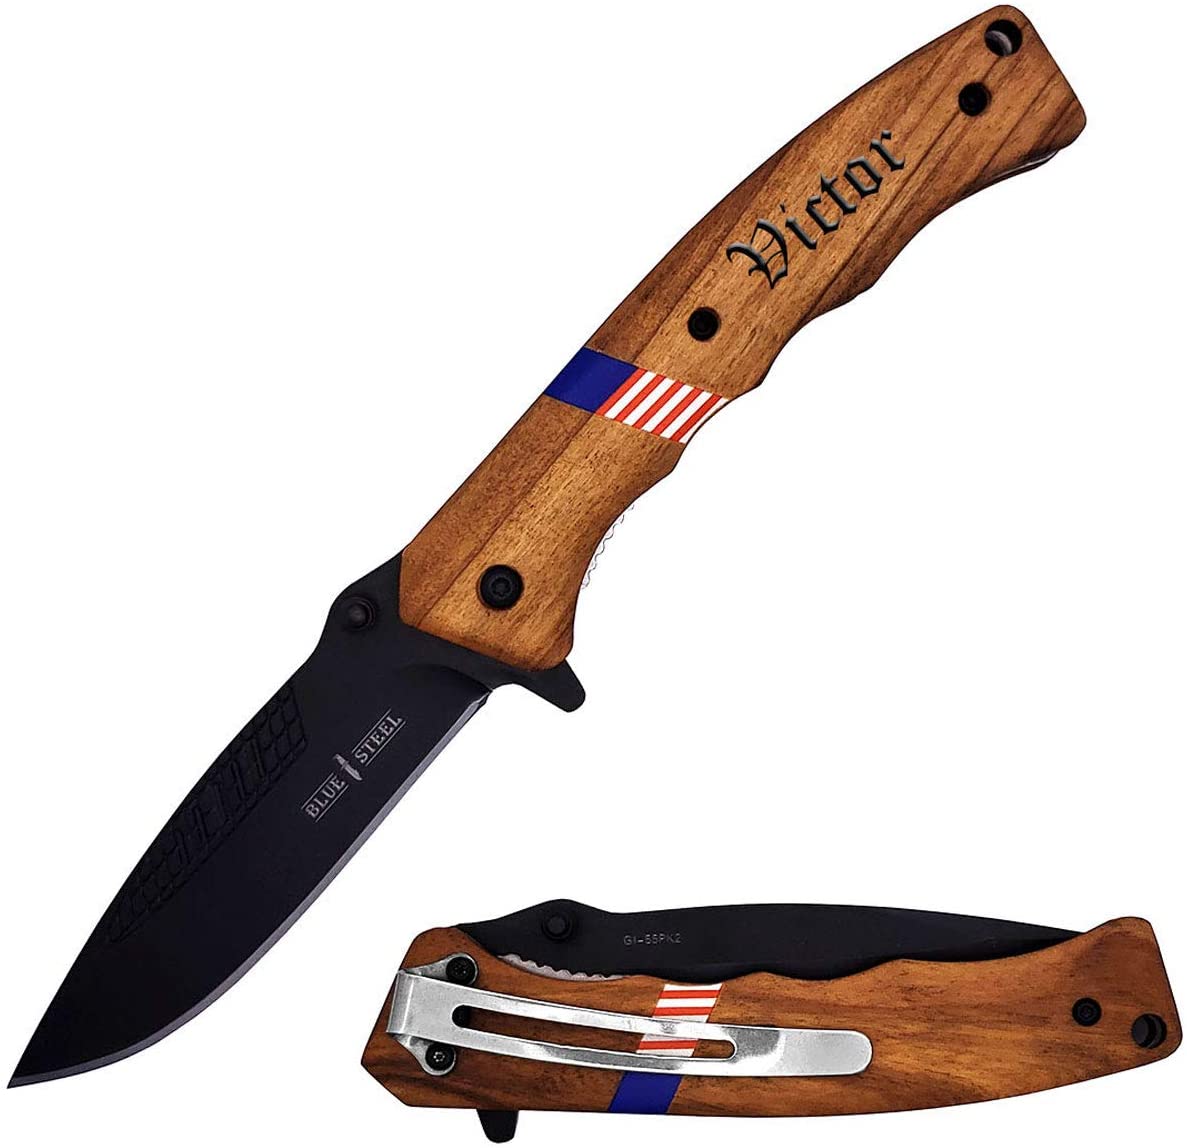 GIFTS INFINITY 8" Overall Custom Engraved Pocket Knife for Camping, Hunting - Personalized Gift